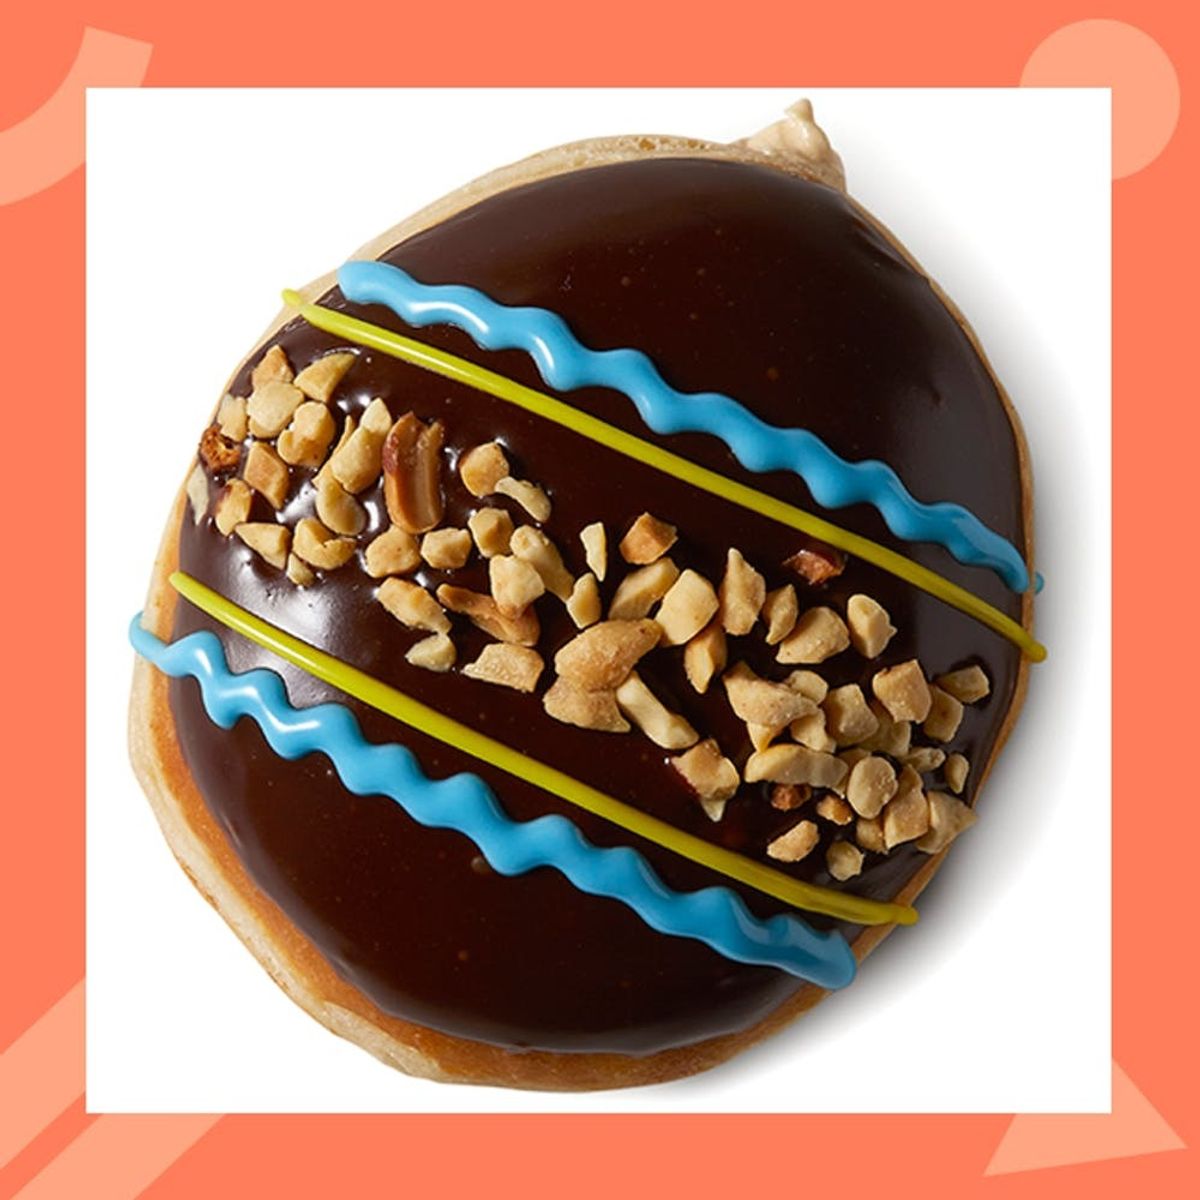 Krispy Kreme’s New Reese’s Egg Donut Gives You Permission to Eat Candy for Breakfast